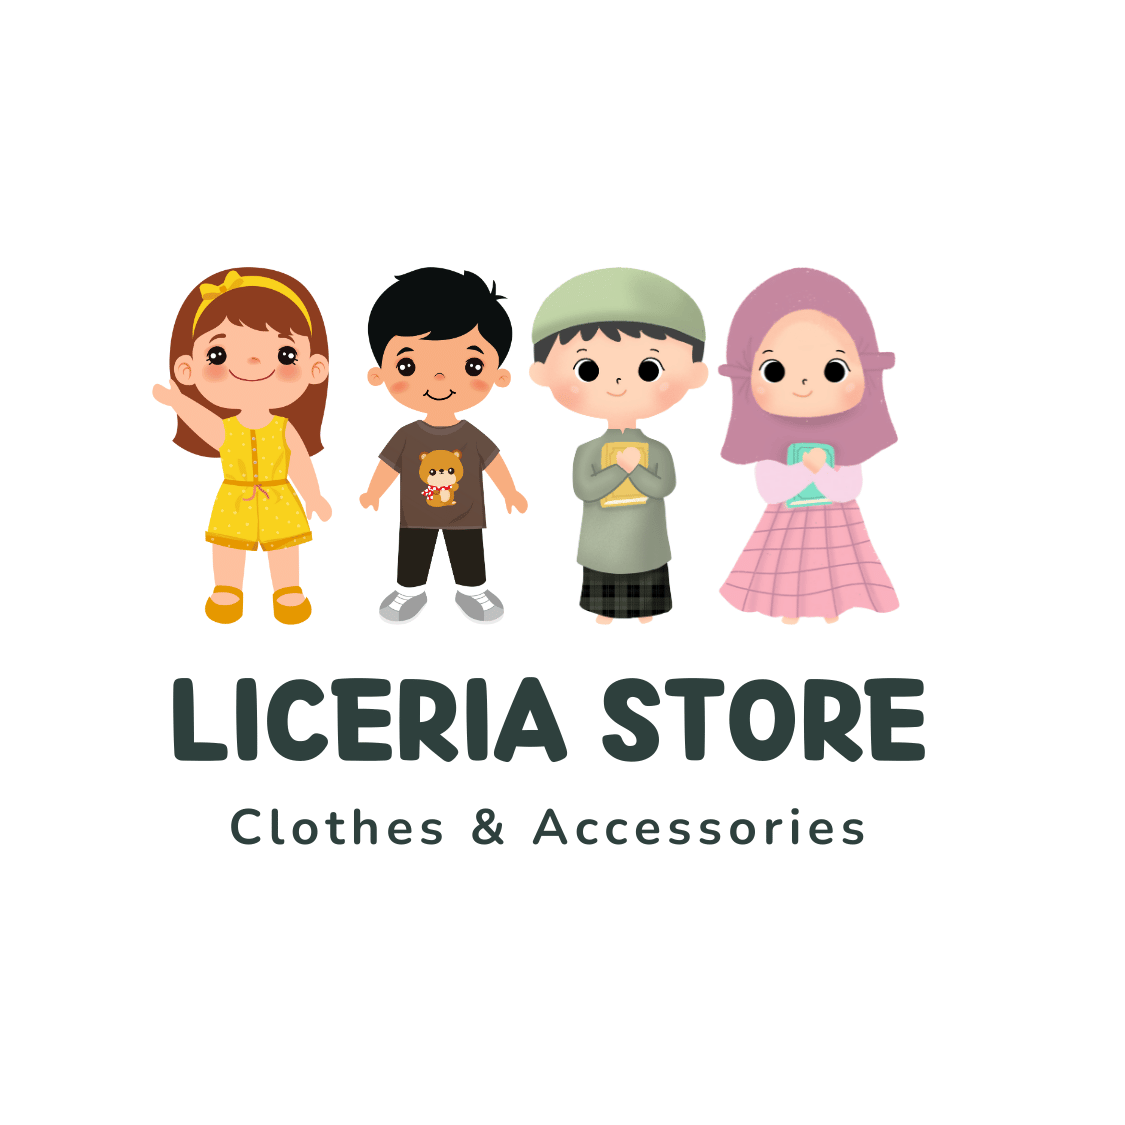 6 in 1 kids toys and fashion logos bundle cover image.